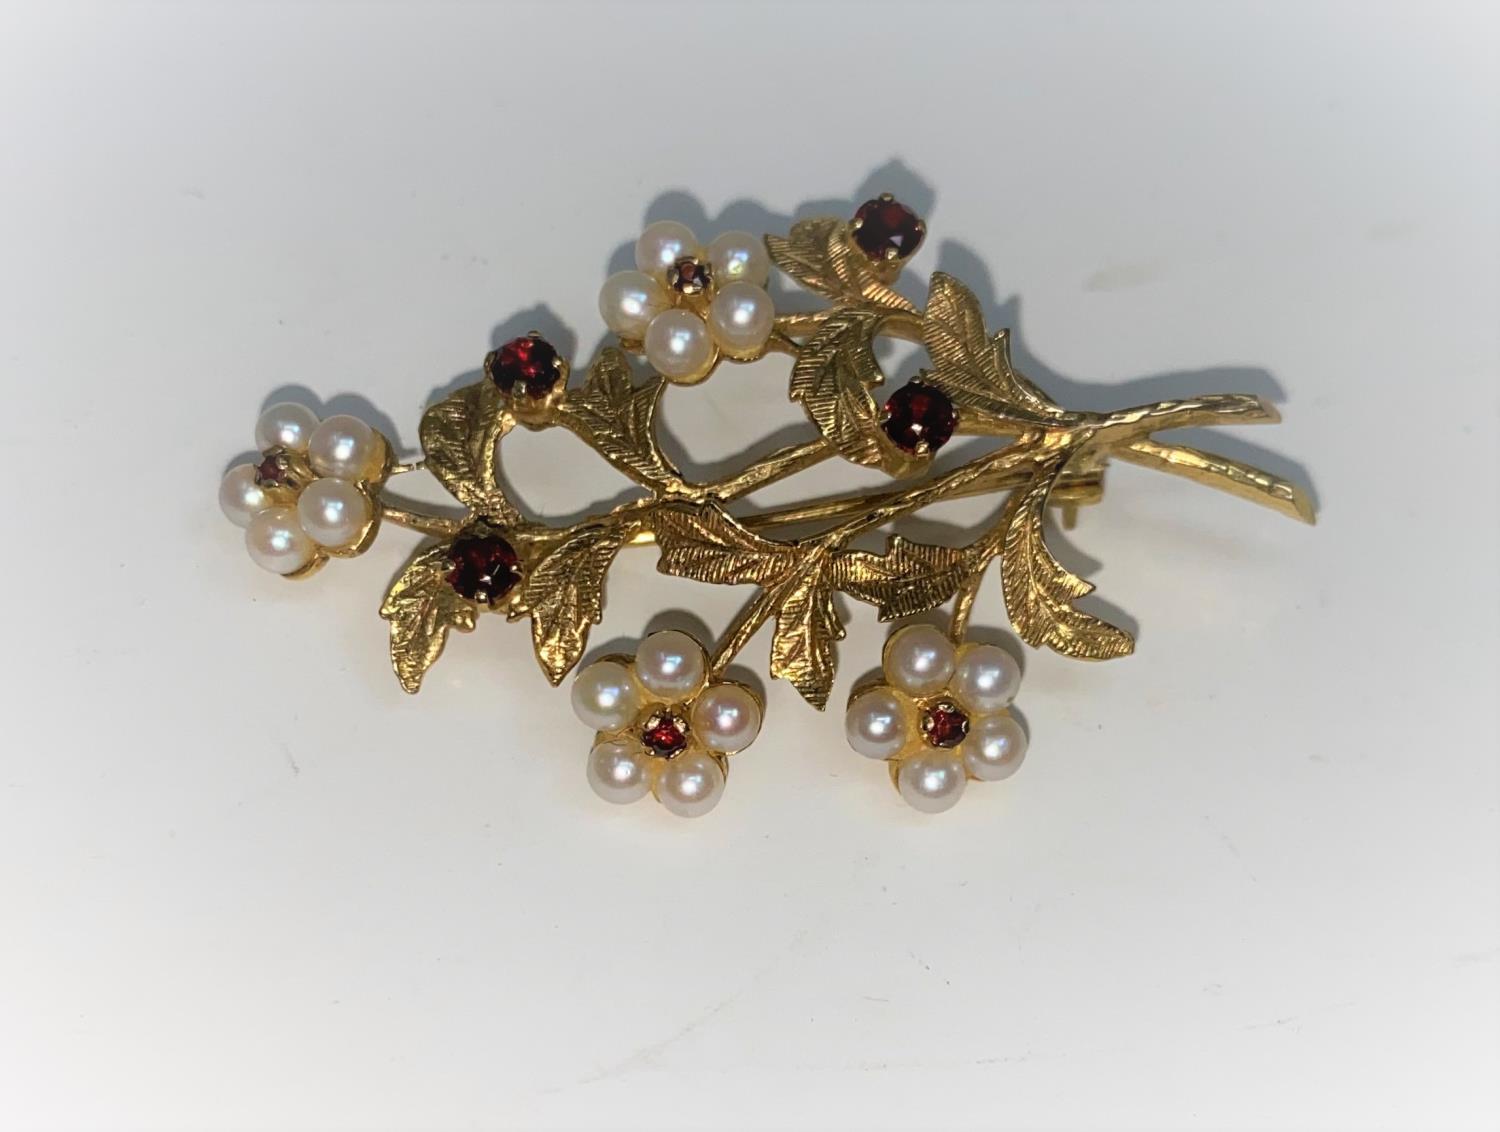 A 9 carat hallmarked gold brooch, floral spray with 4 flowerheads set seed pearls and garnets, the